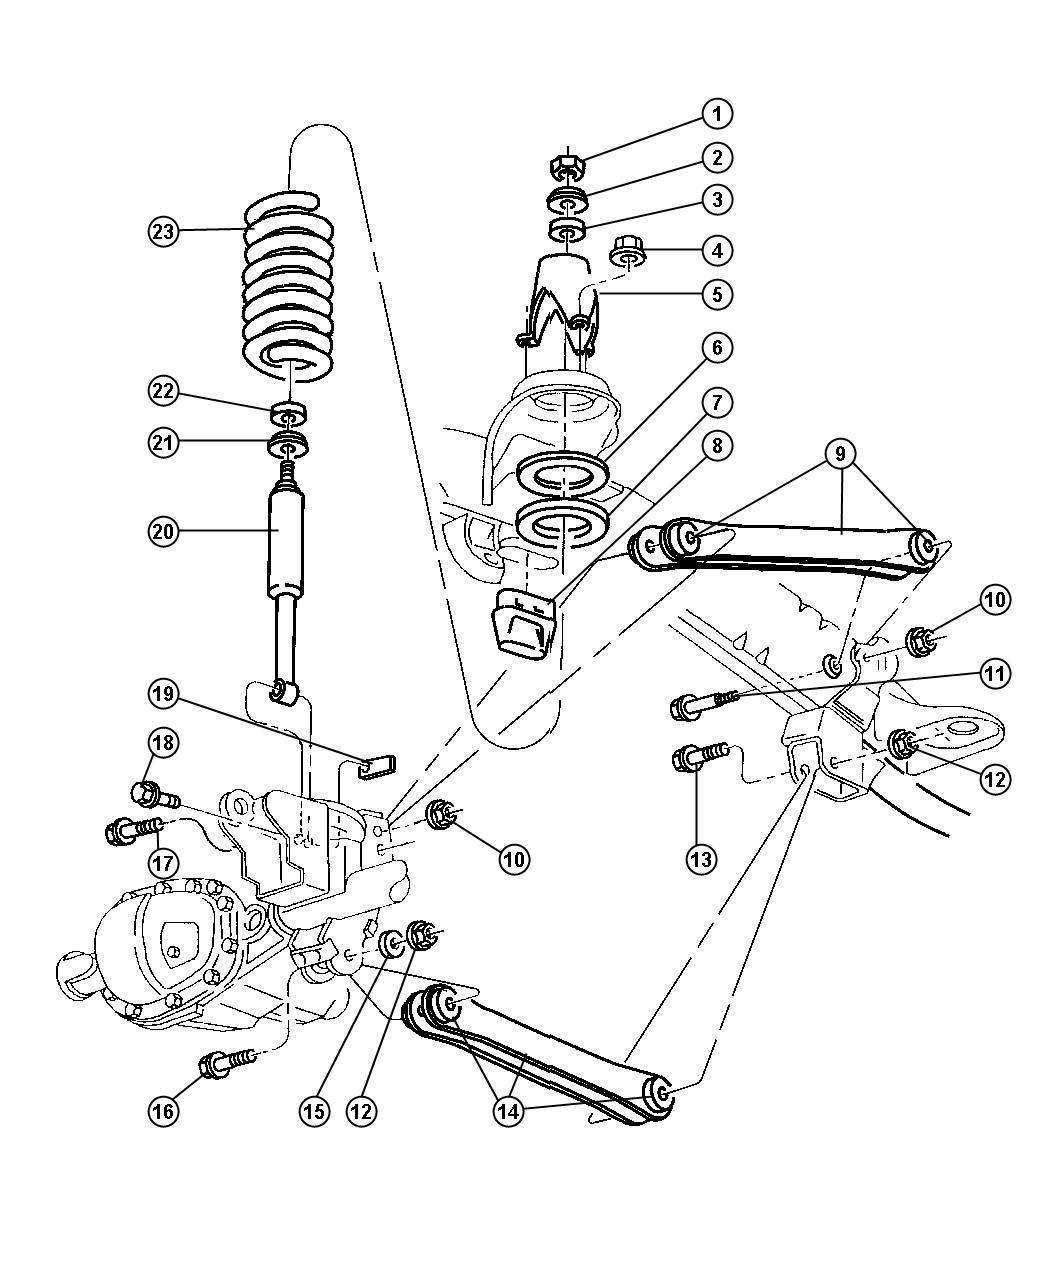 Control Arms,Springs and Shocks,D1-8. Diagram